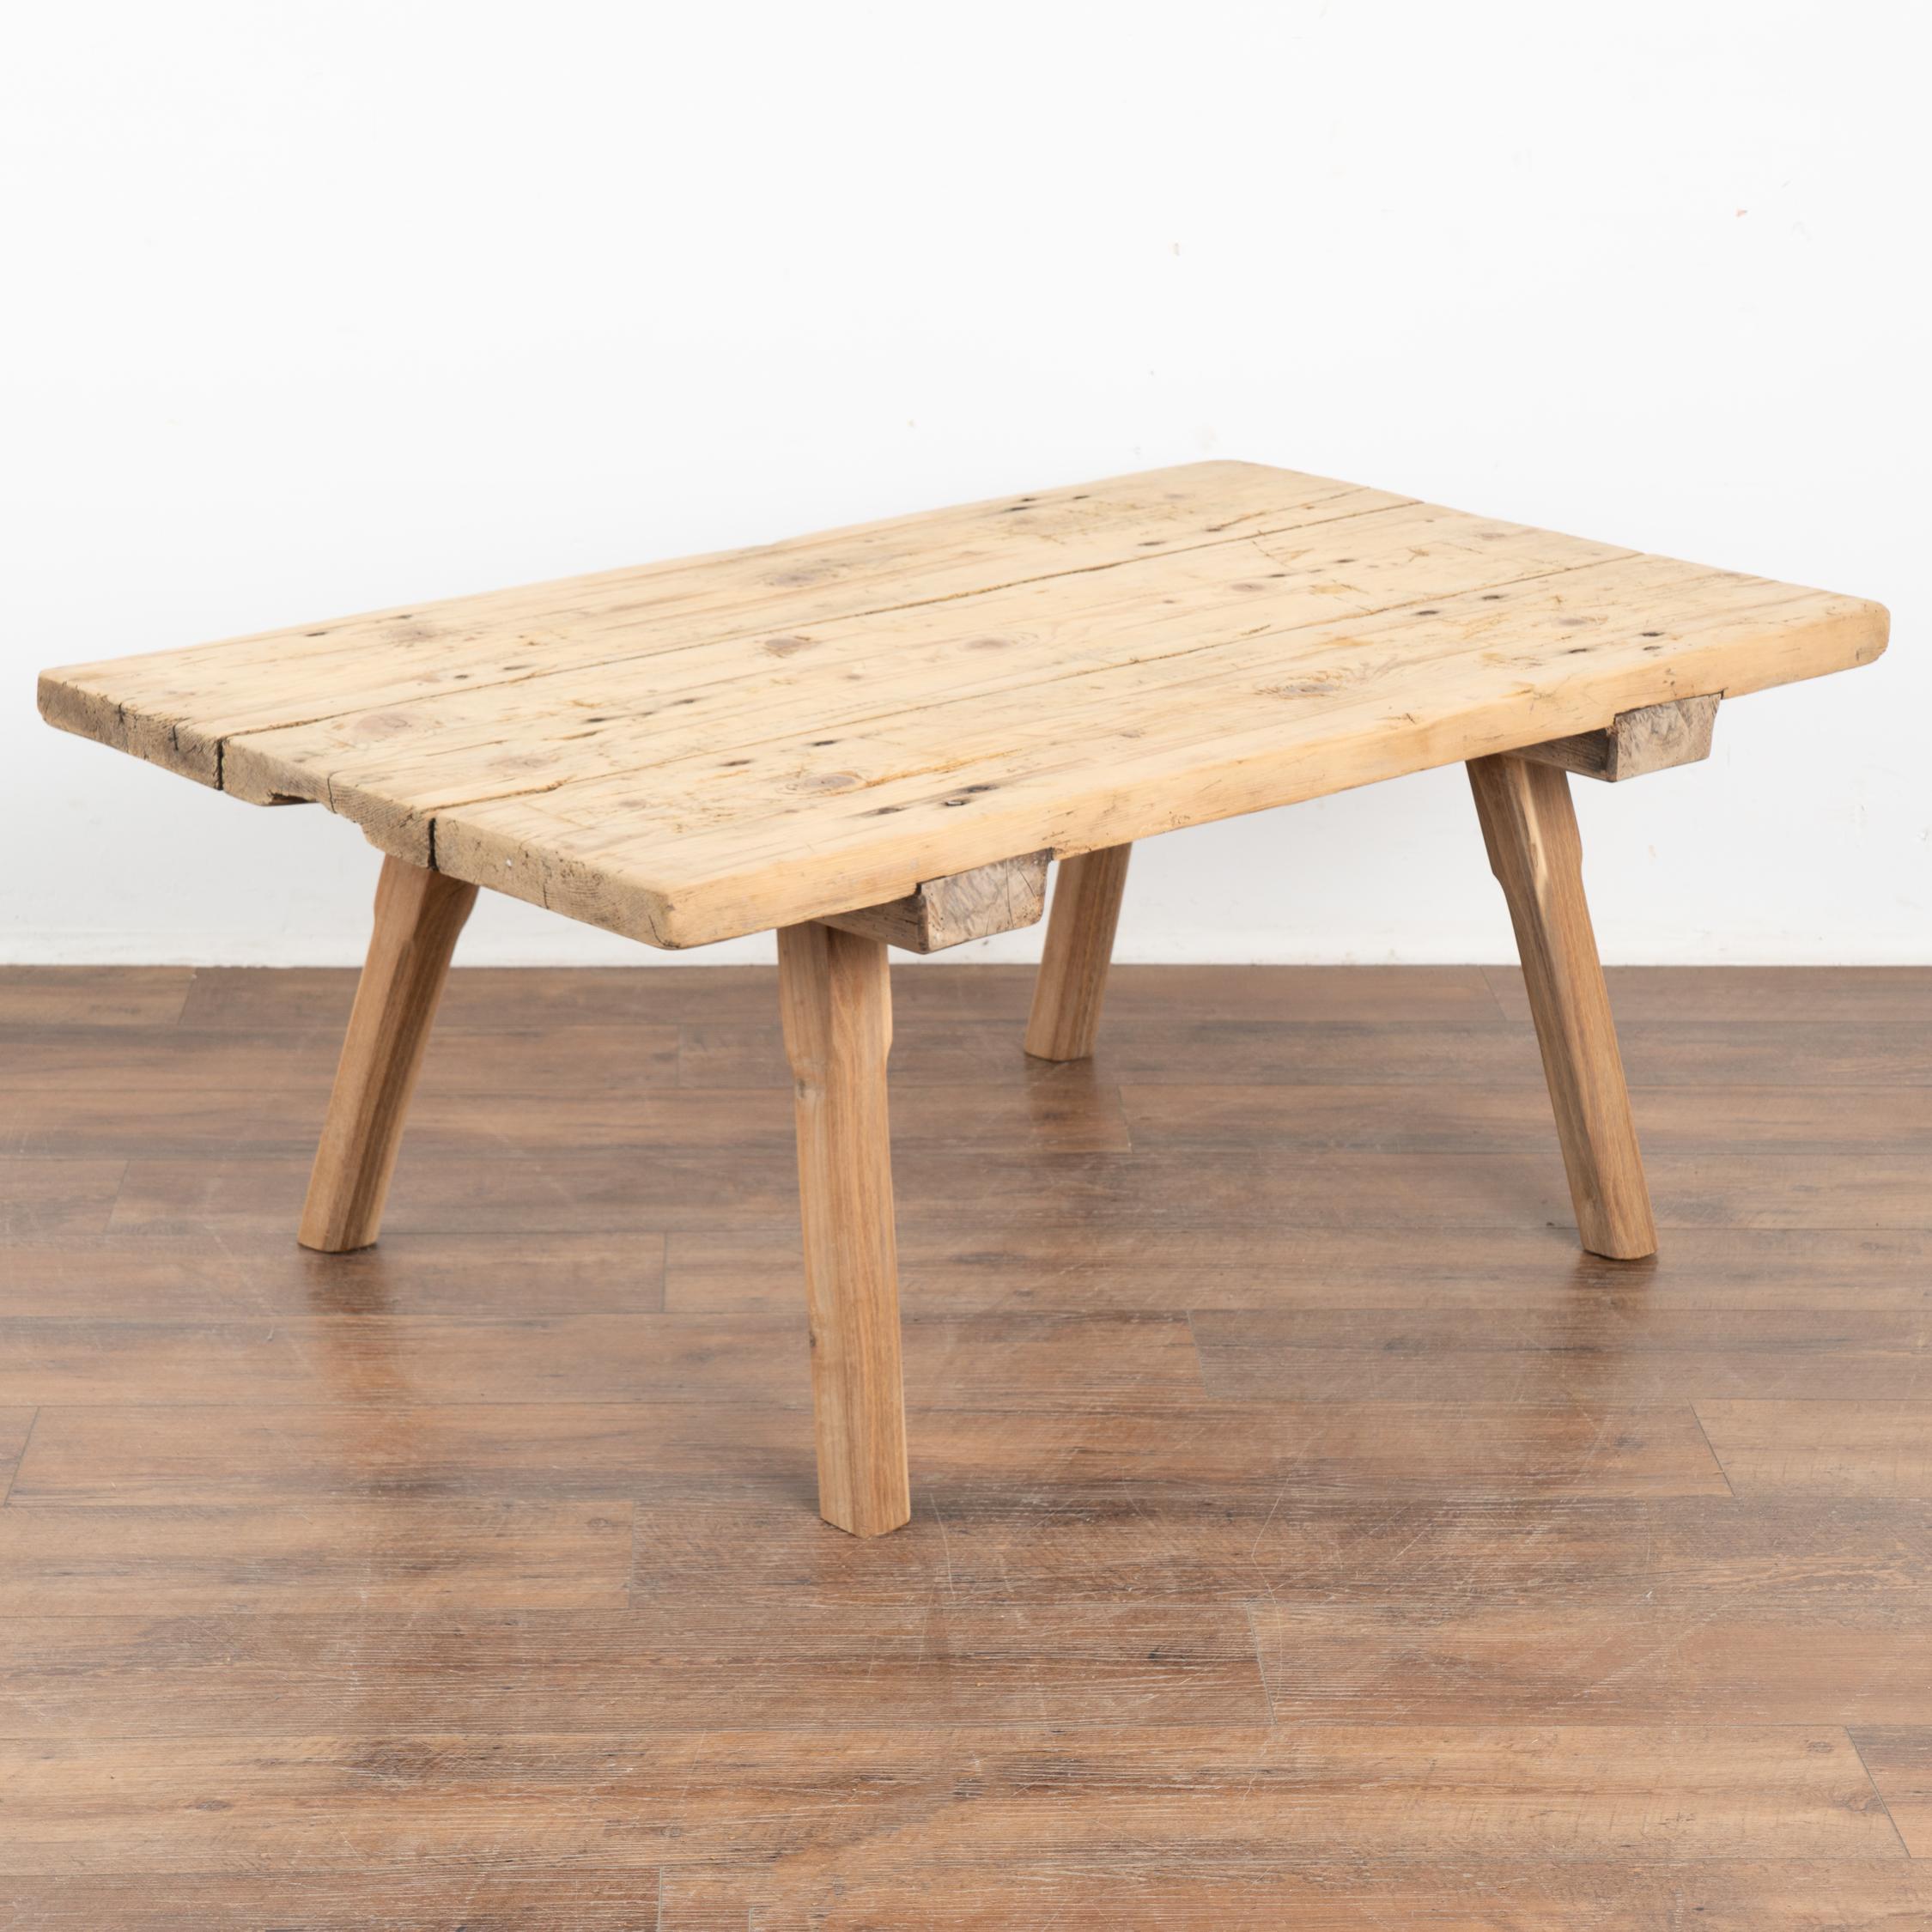 Rustic wood coffee table with squared splay legs and loaded with vintage character.
The thick top is made from three planks which are covered in scrapes, deep gouges, old cracks and stains acquired with over 100 years of use as a work table. Typical